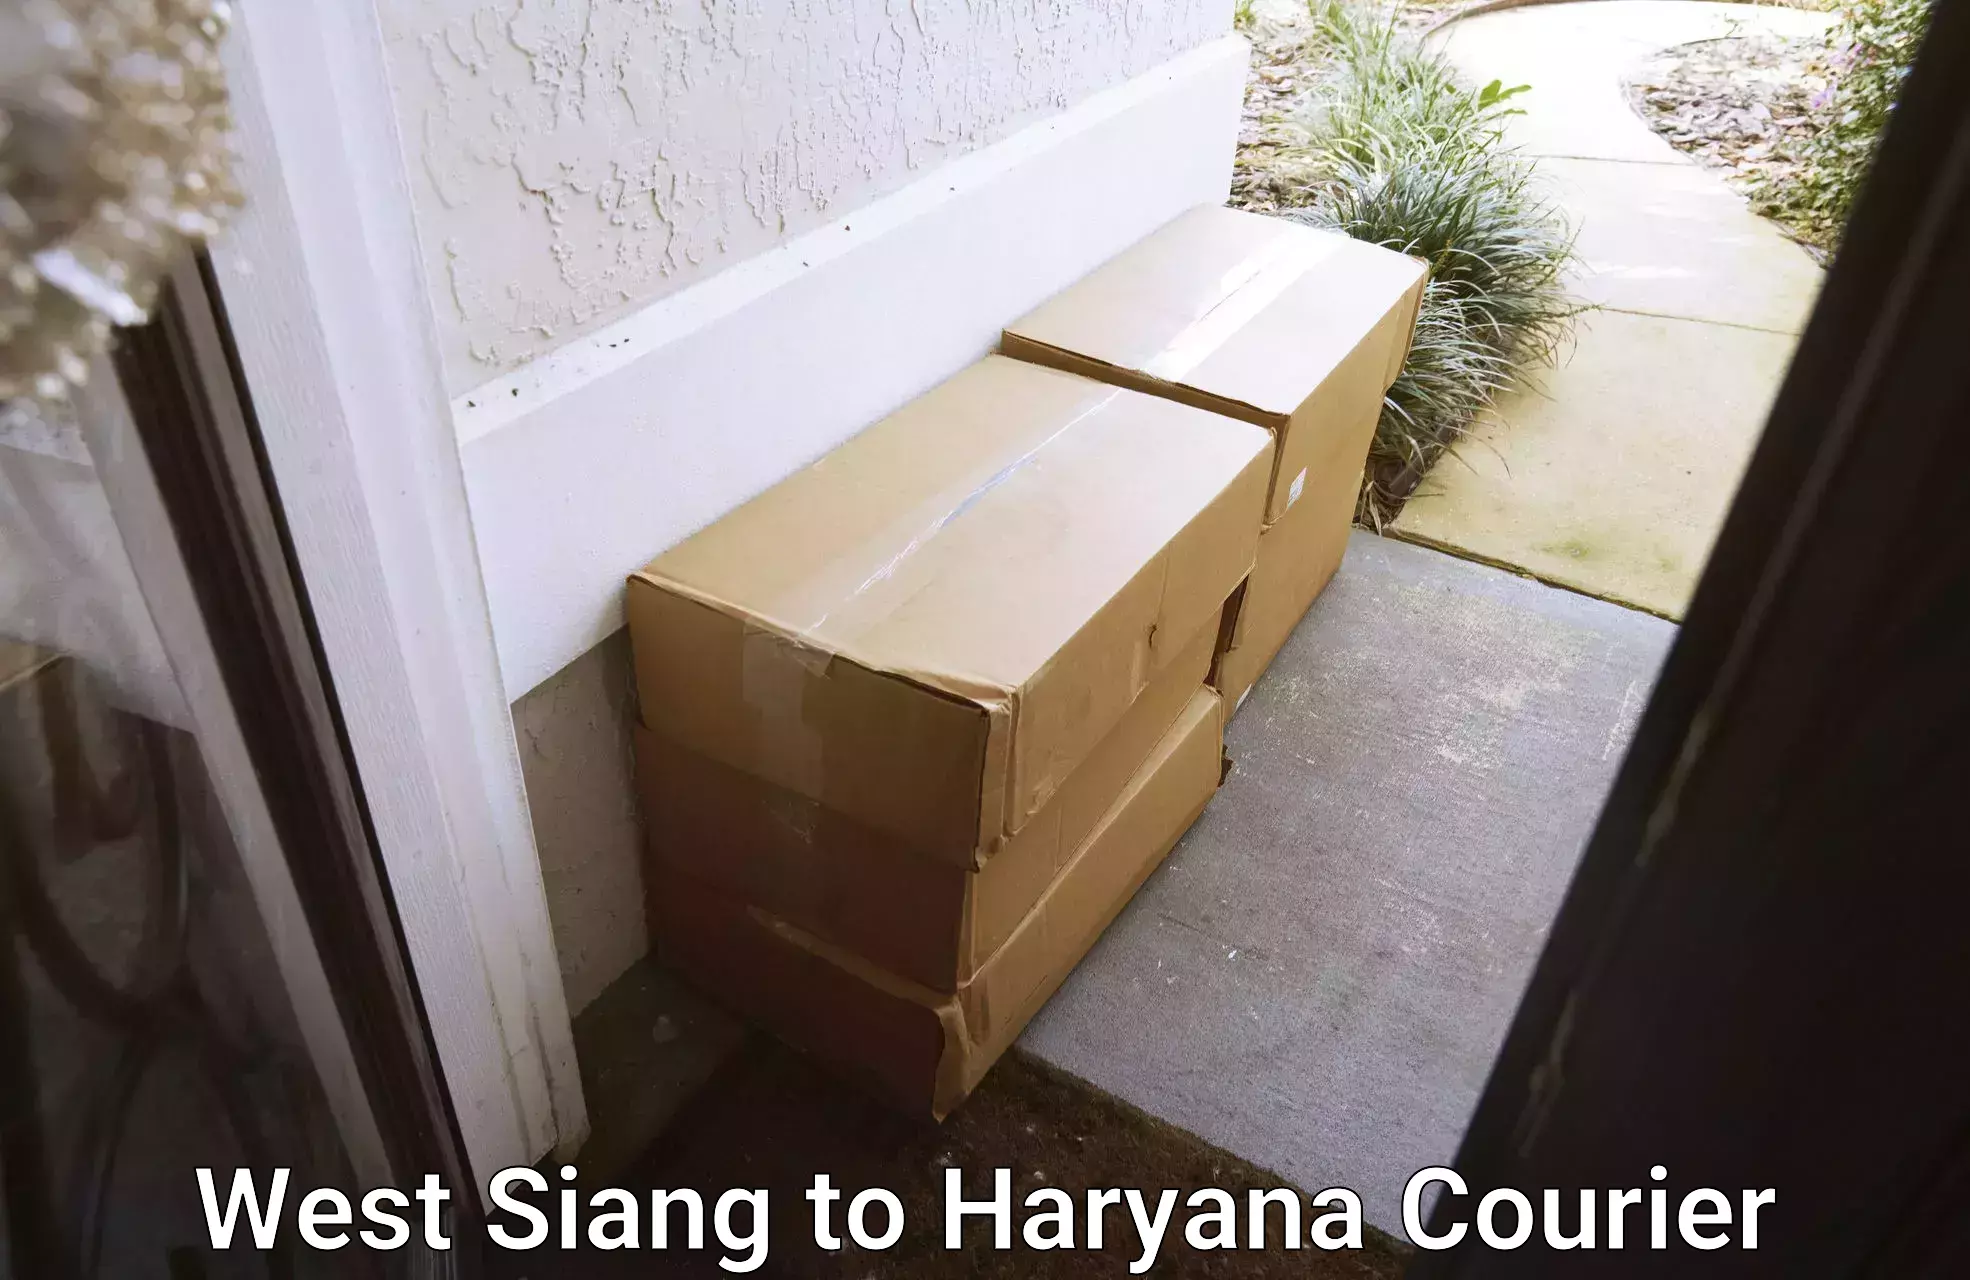 Courier dispatch services West Siang to Haryana